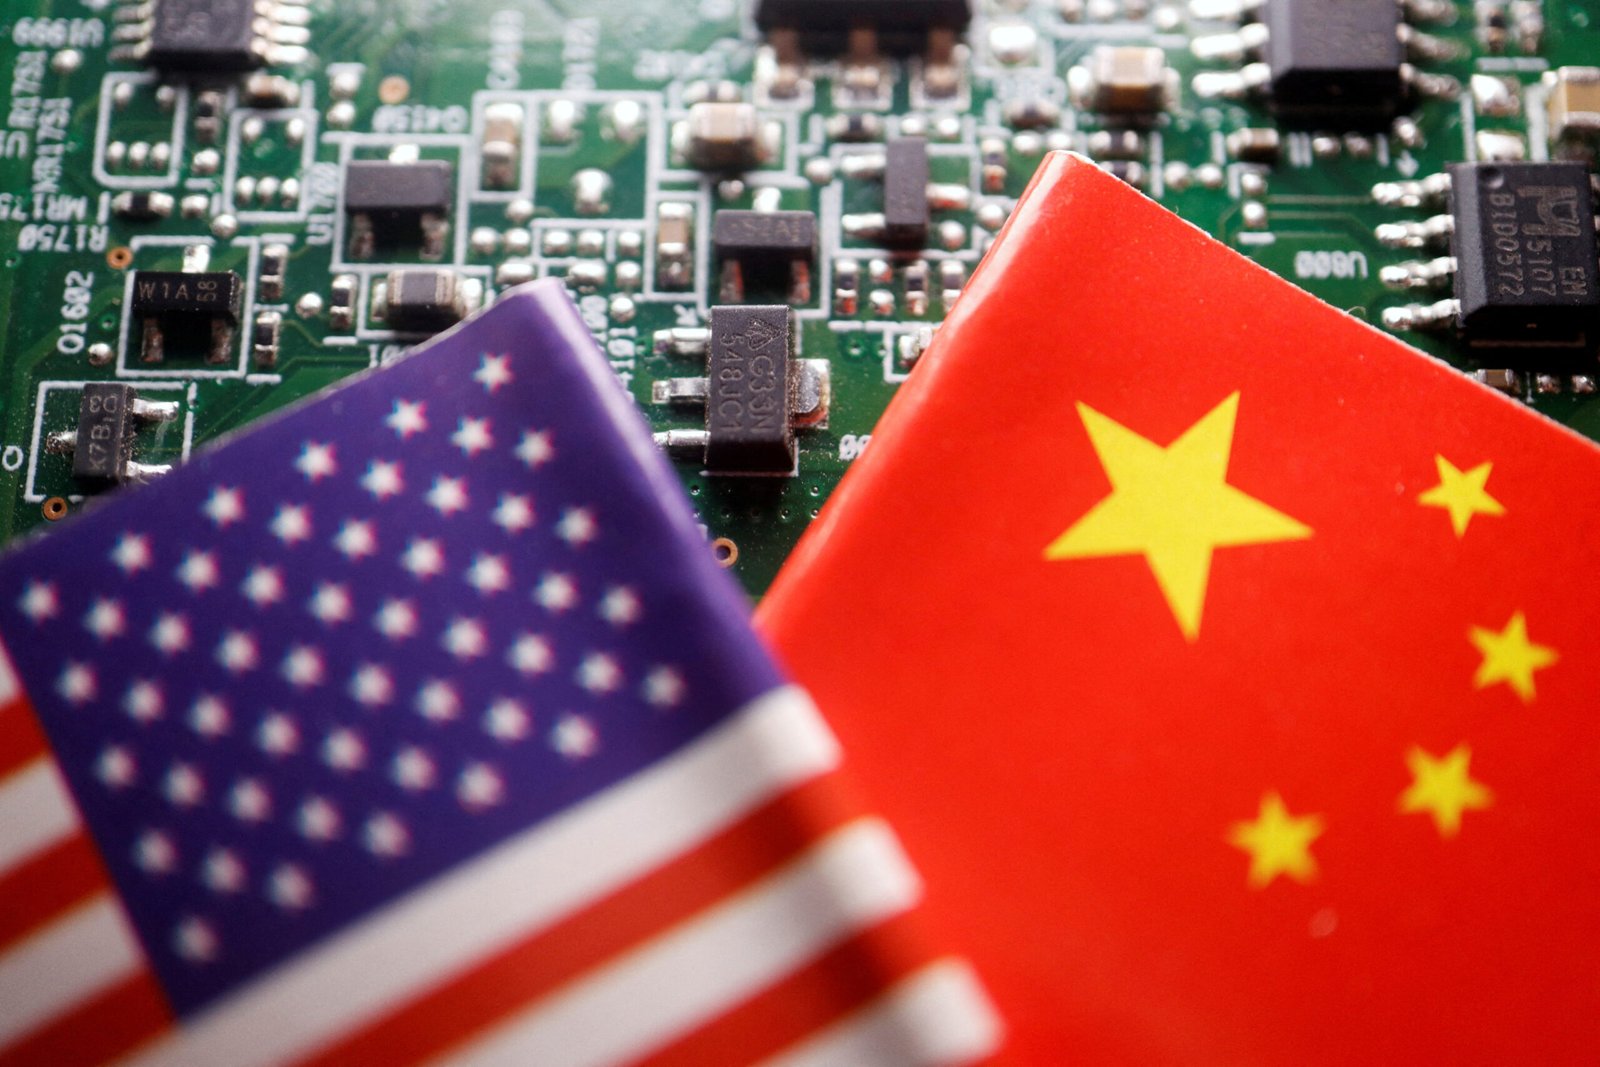 biden-signs-order-to-ban-certain-tech-investments-in-china